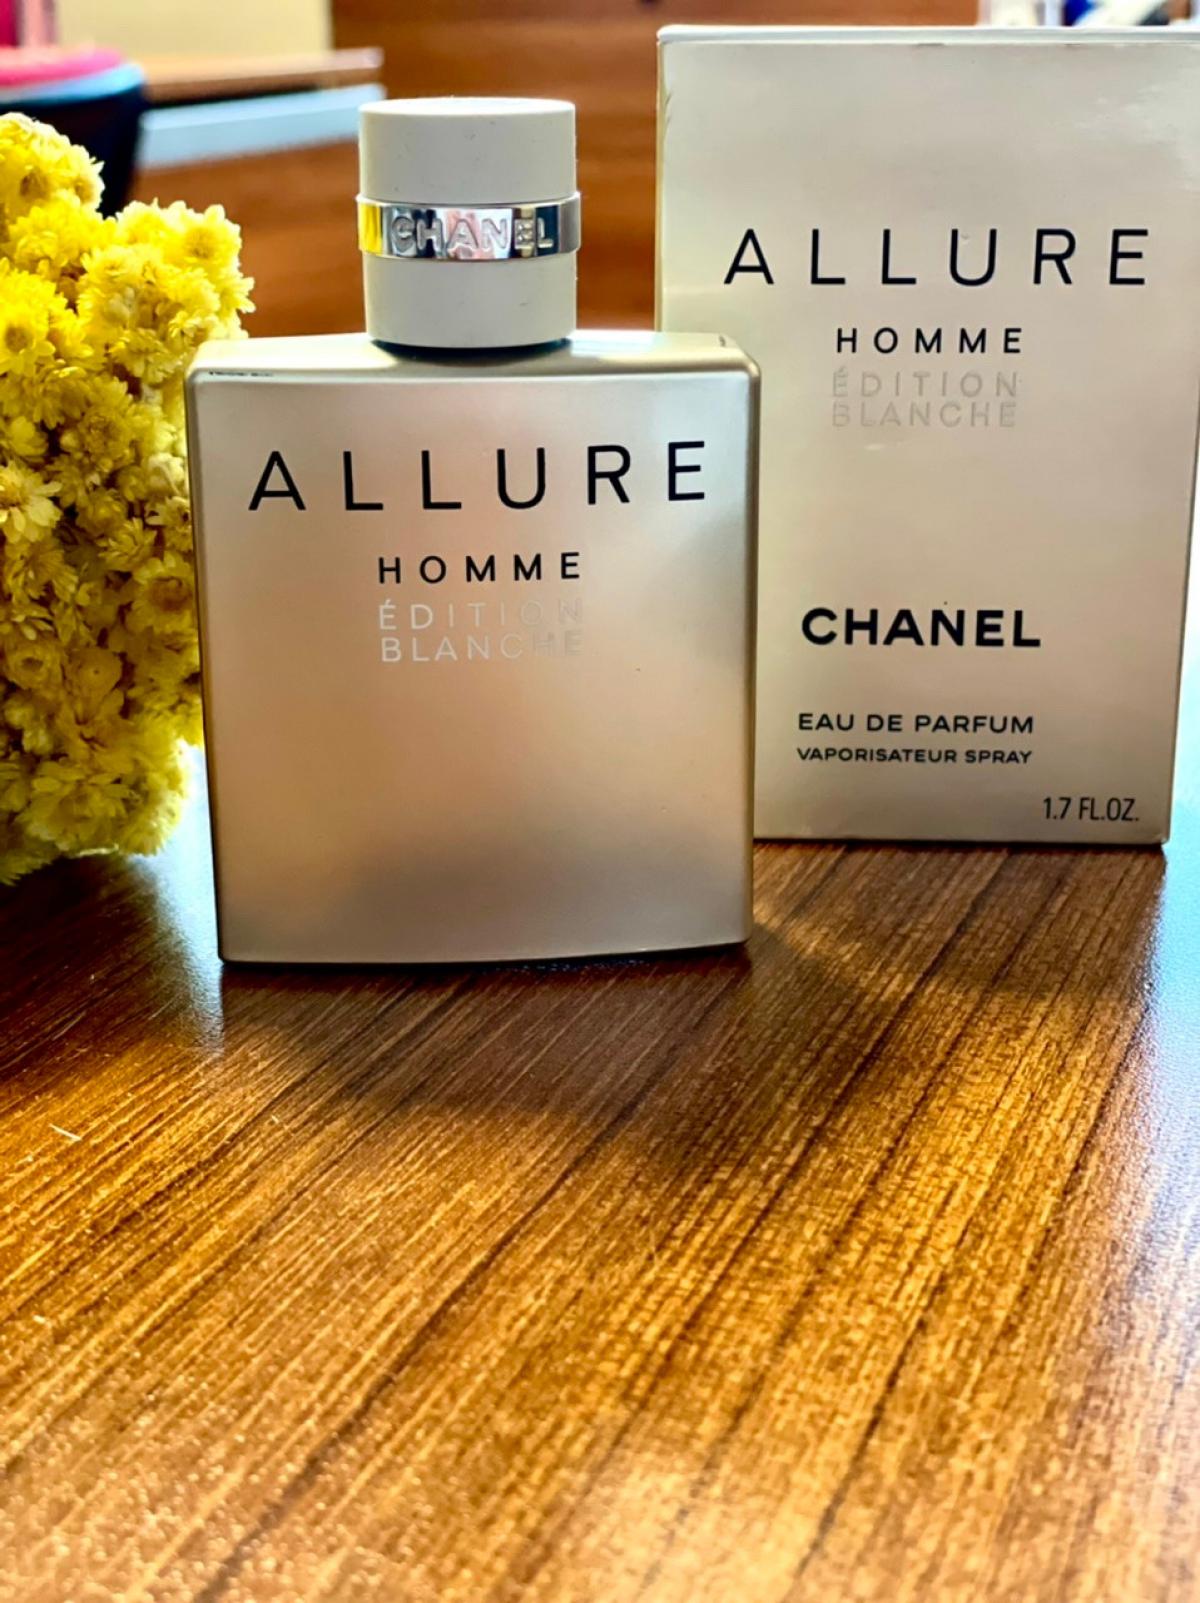 Chanel homme edition. Chanel мужские. Allure homme Edition Blanche. Шанель Аллюр Бланш. Духи Chanel Allure homme Edition Blanche. Chanel Allure homme Sport Edition Blanche.